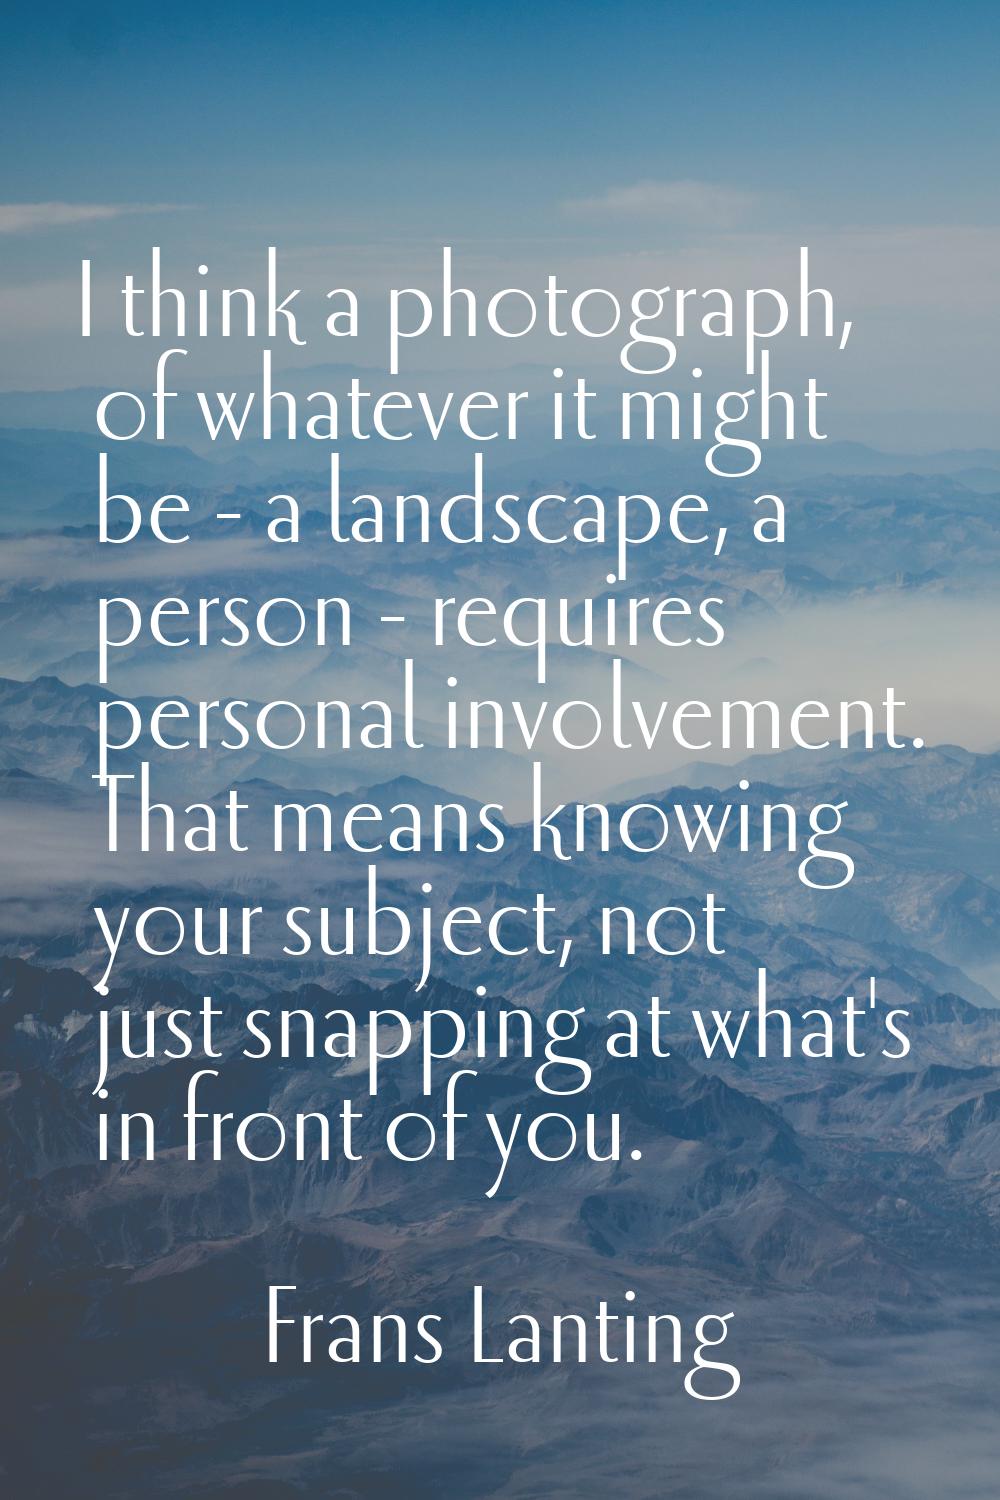 I think a photograph, of whatever it might be - a landscape, a person - requires personal involveme